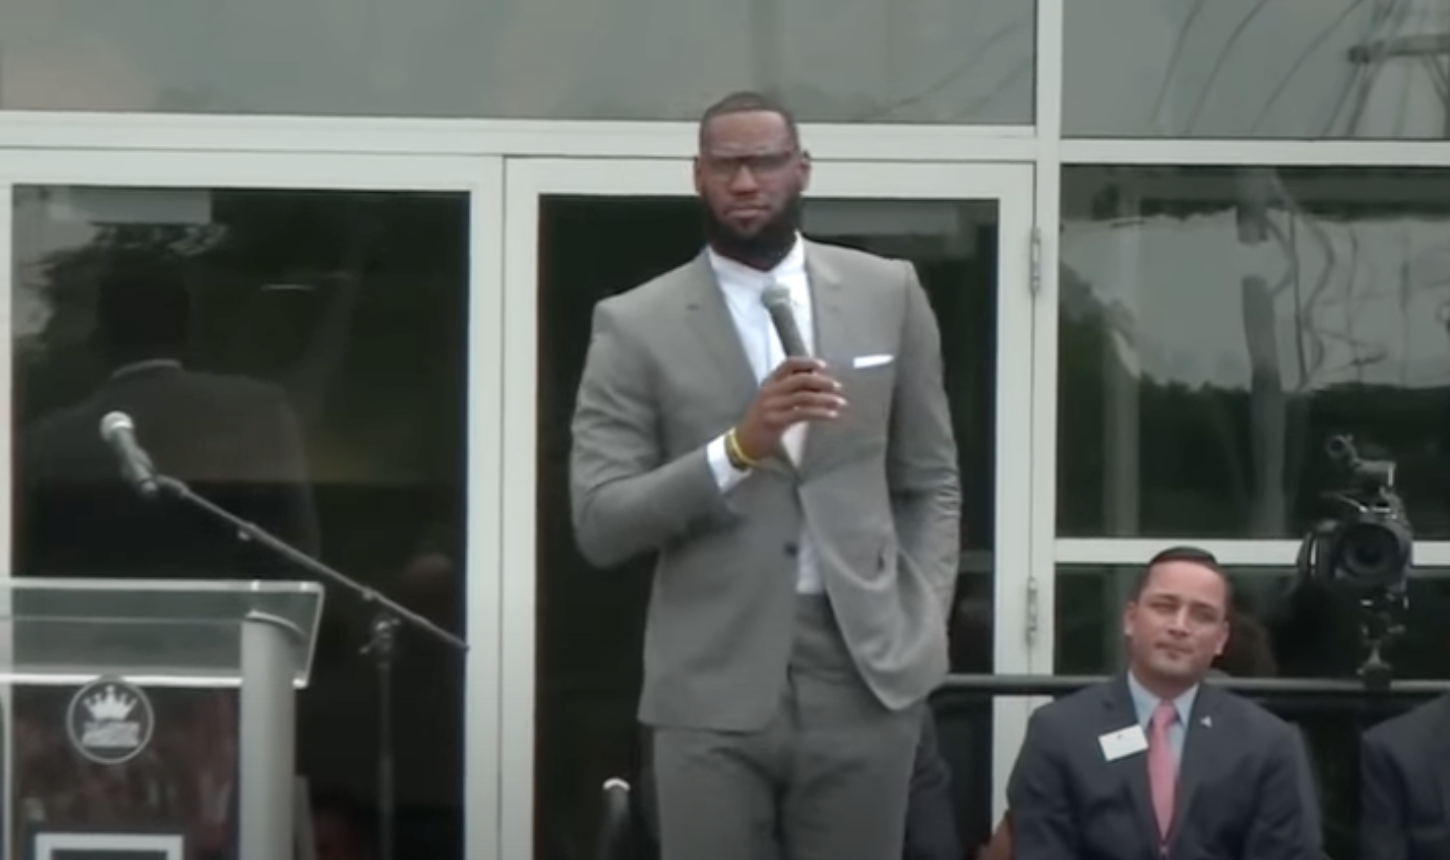 Humiliating Student Test Results From LeBron JamesSupported ‘I Promise